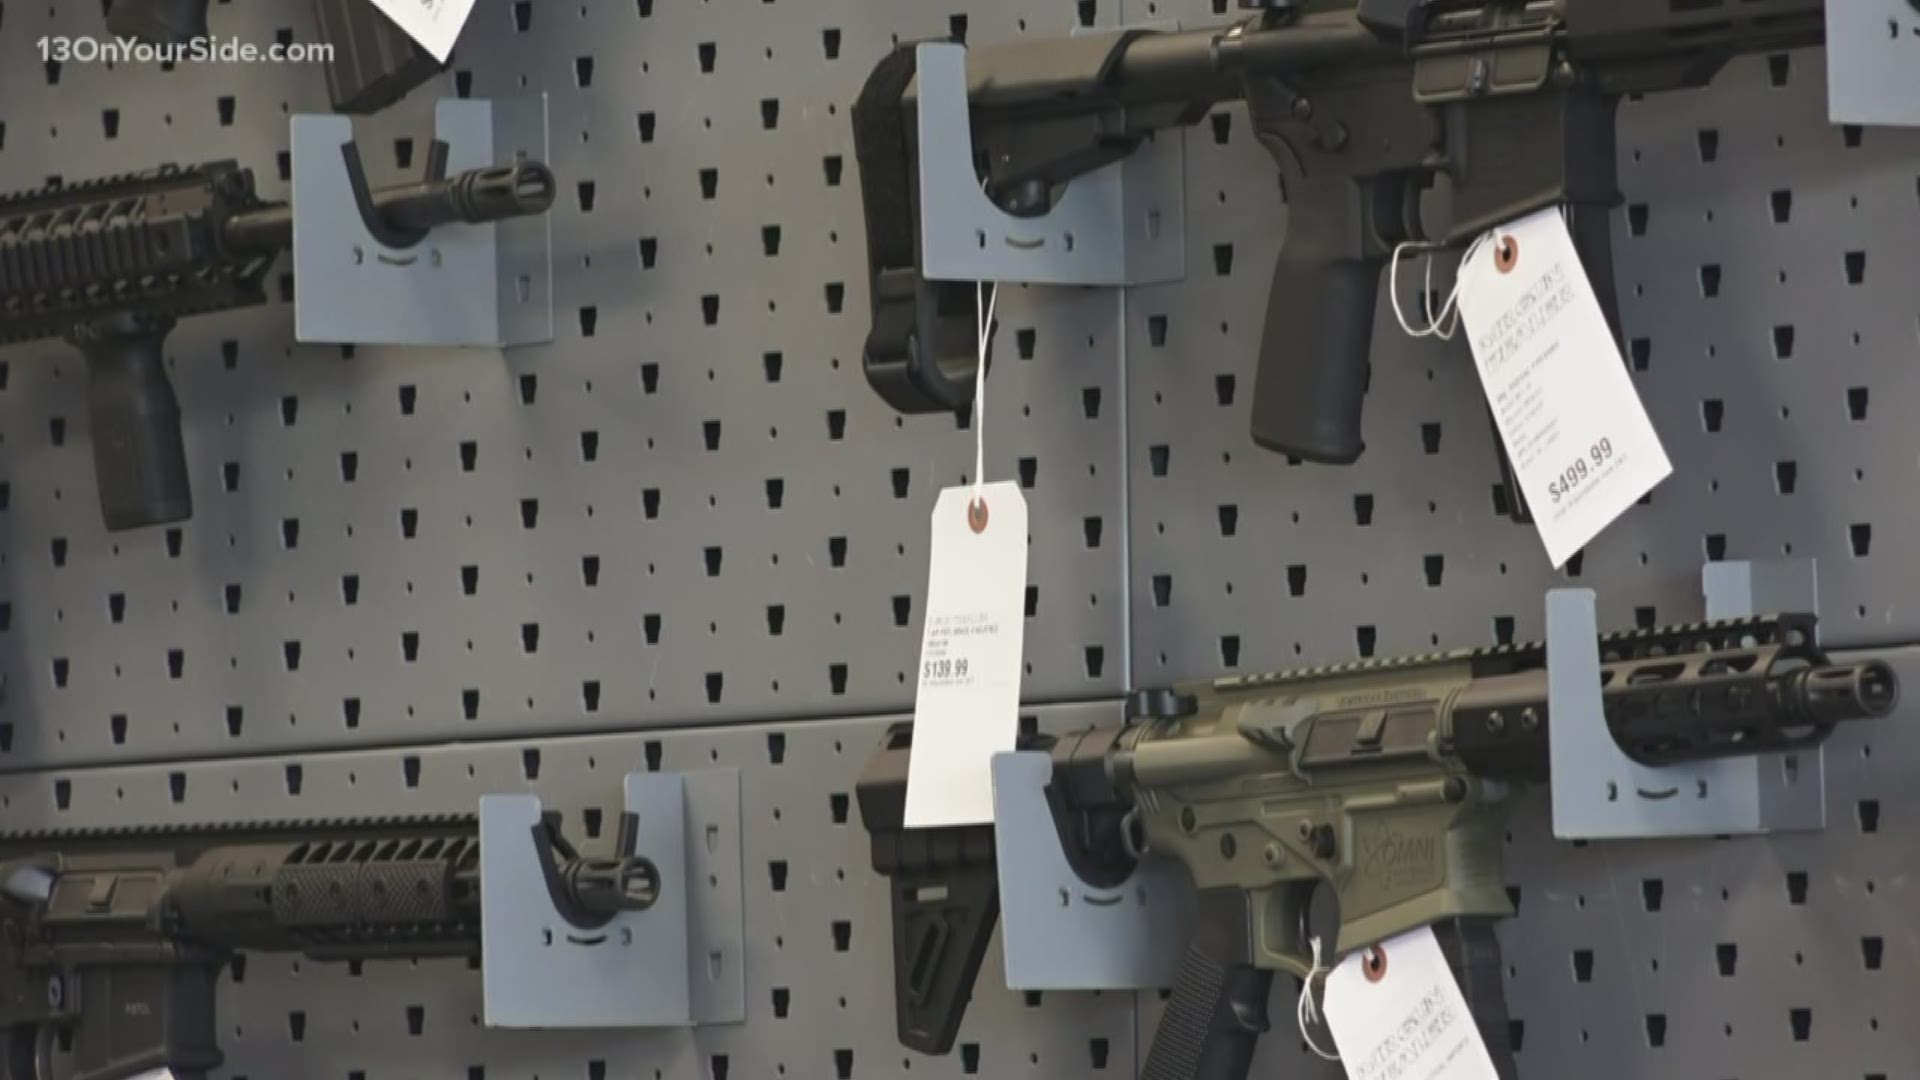 Gun store increasing security measures after thefts